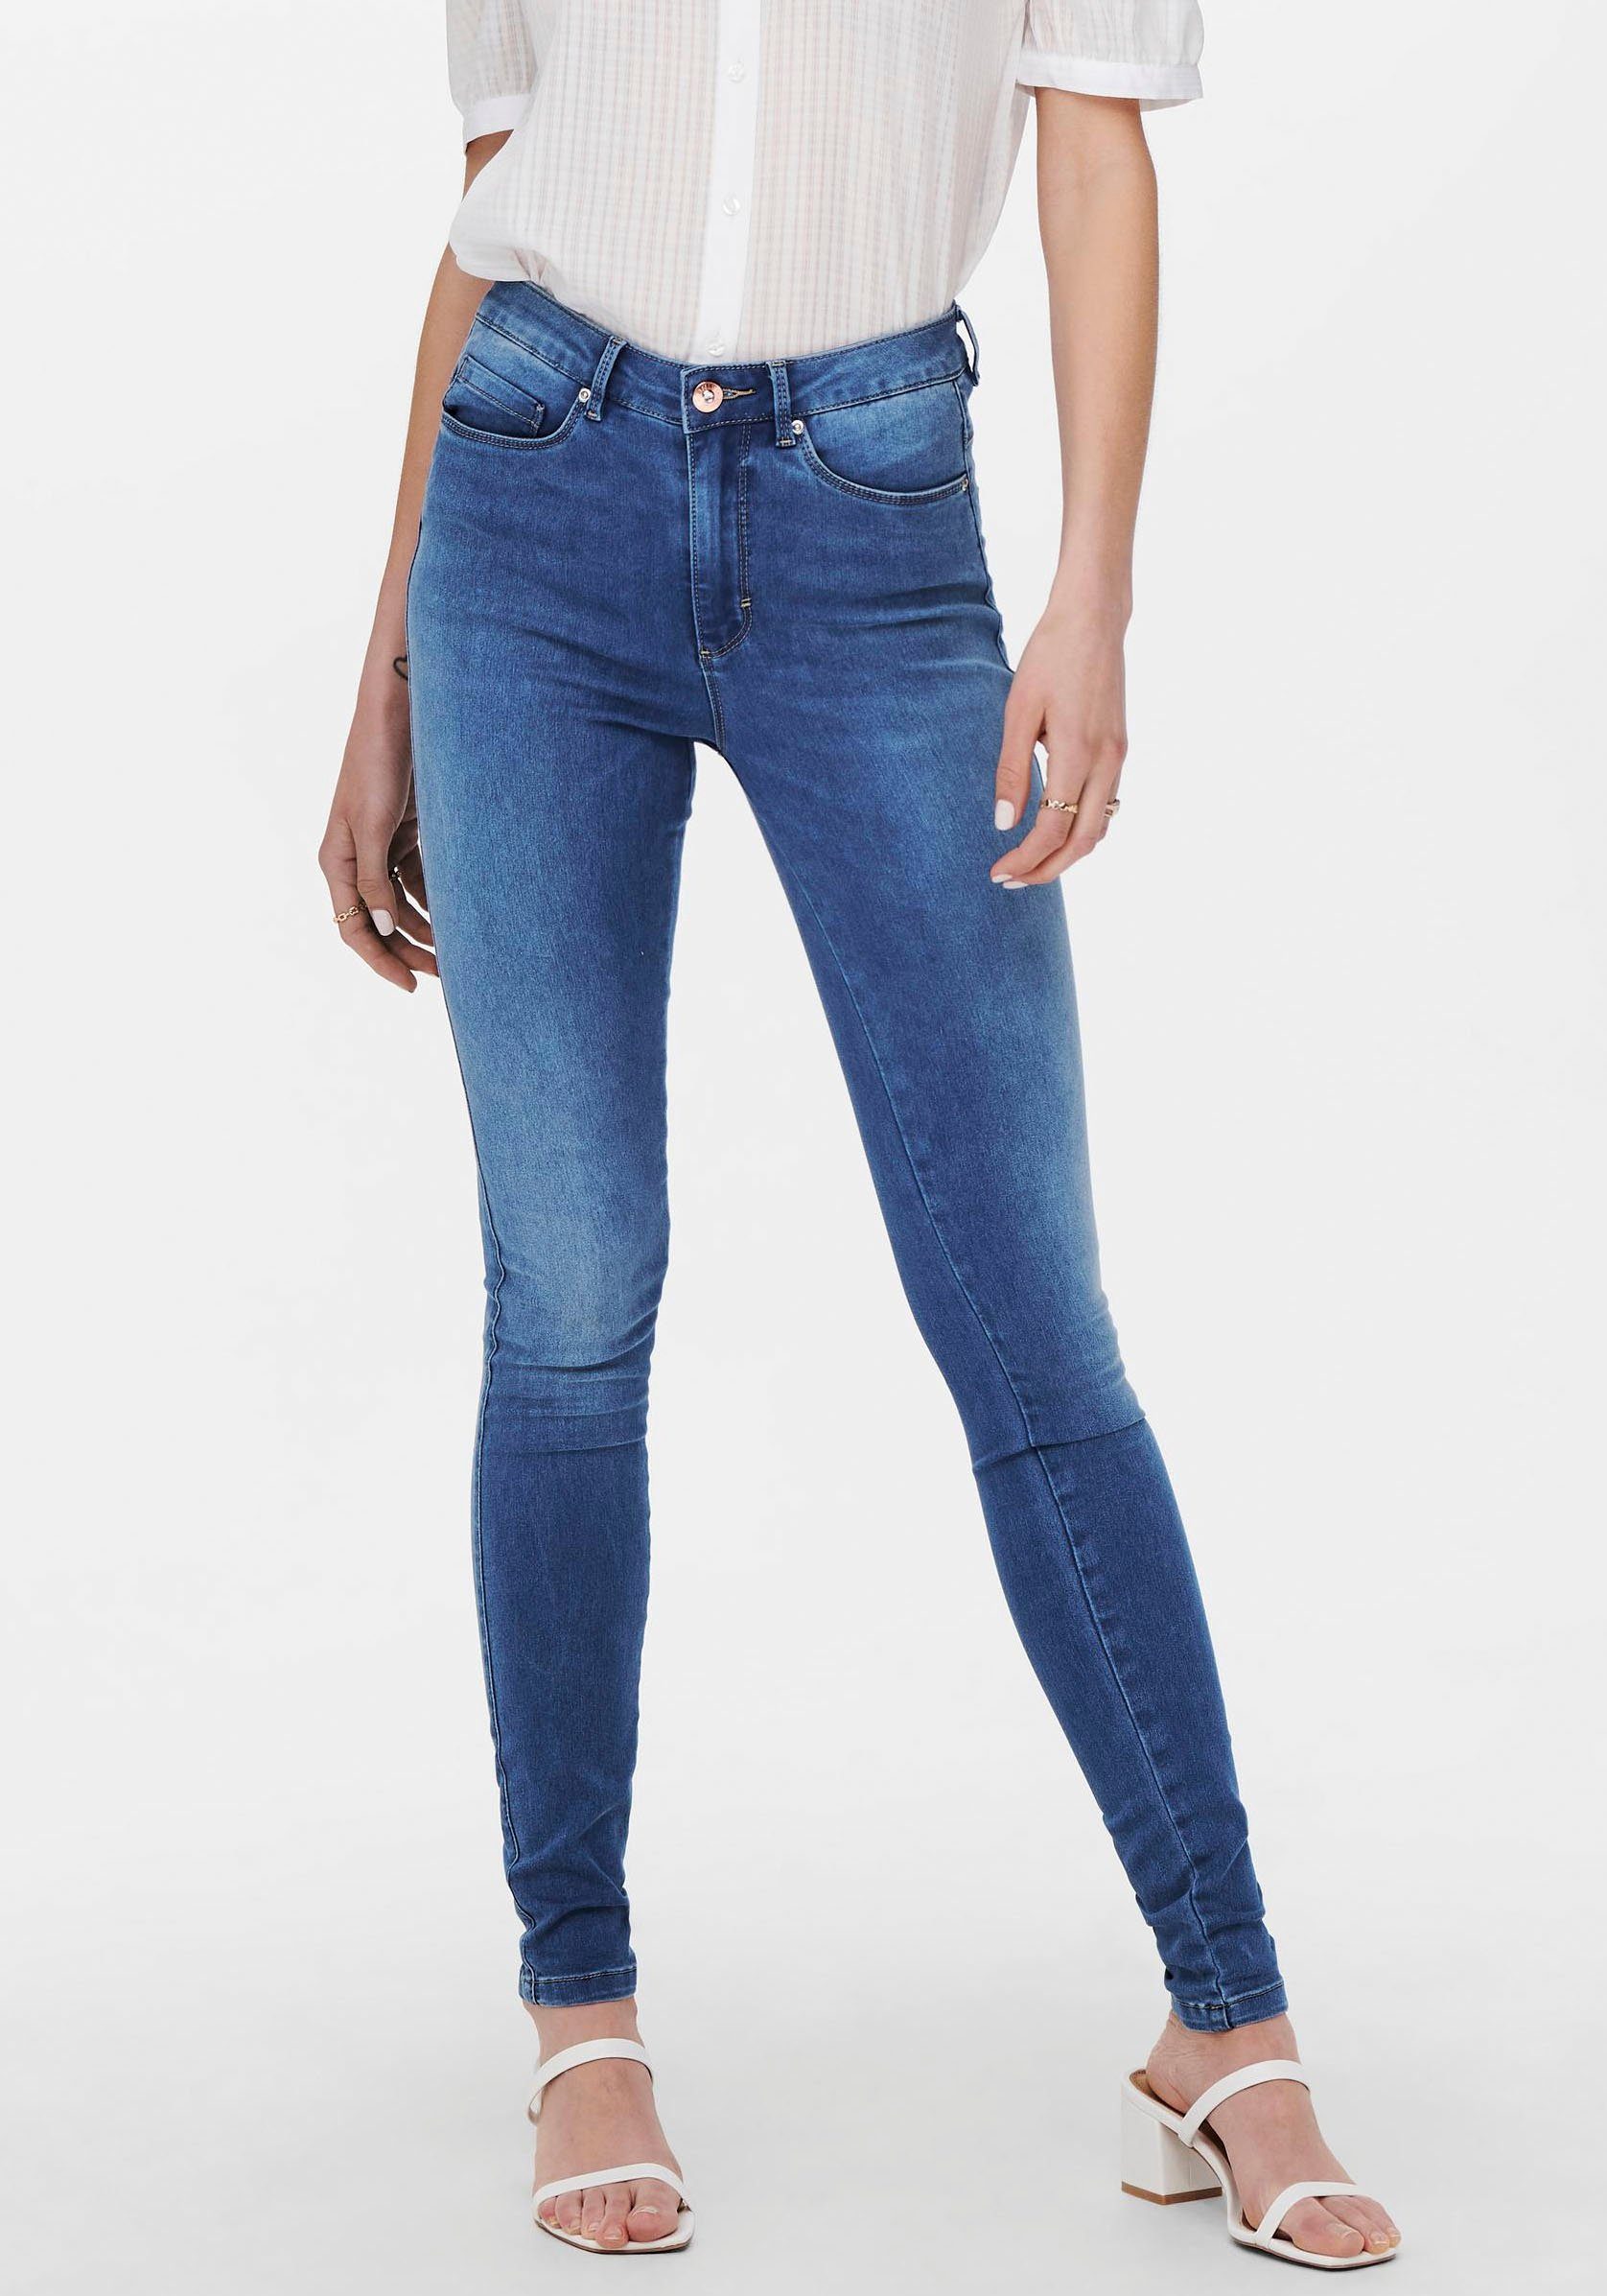 Only skinny fit jeans